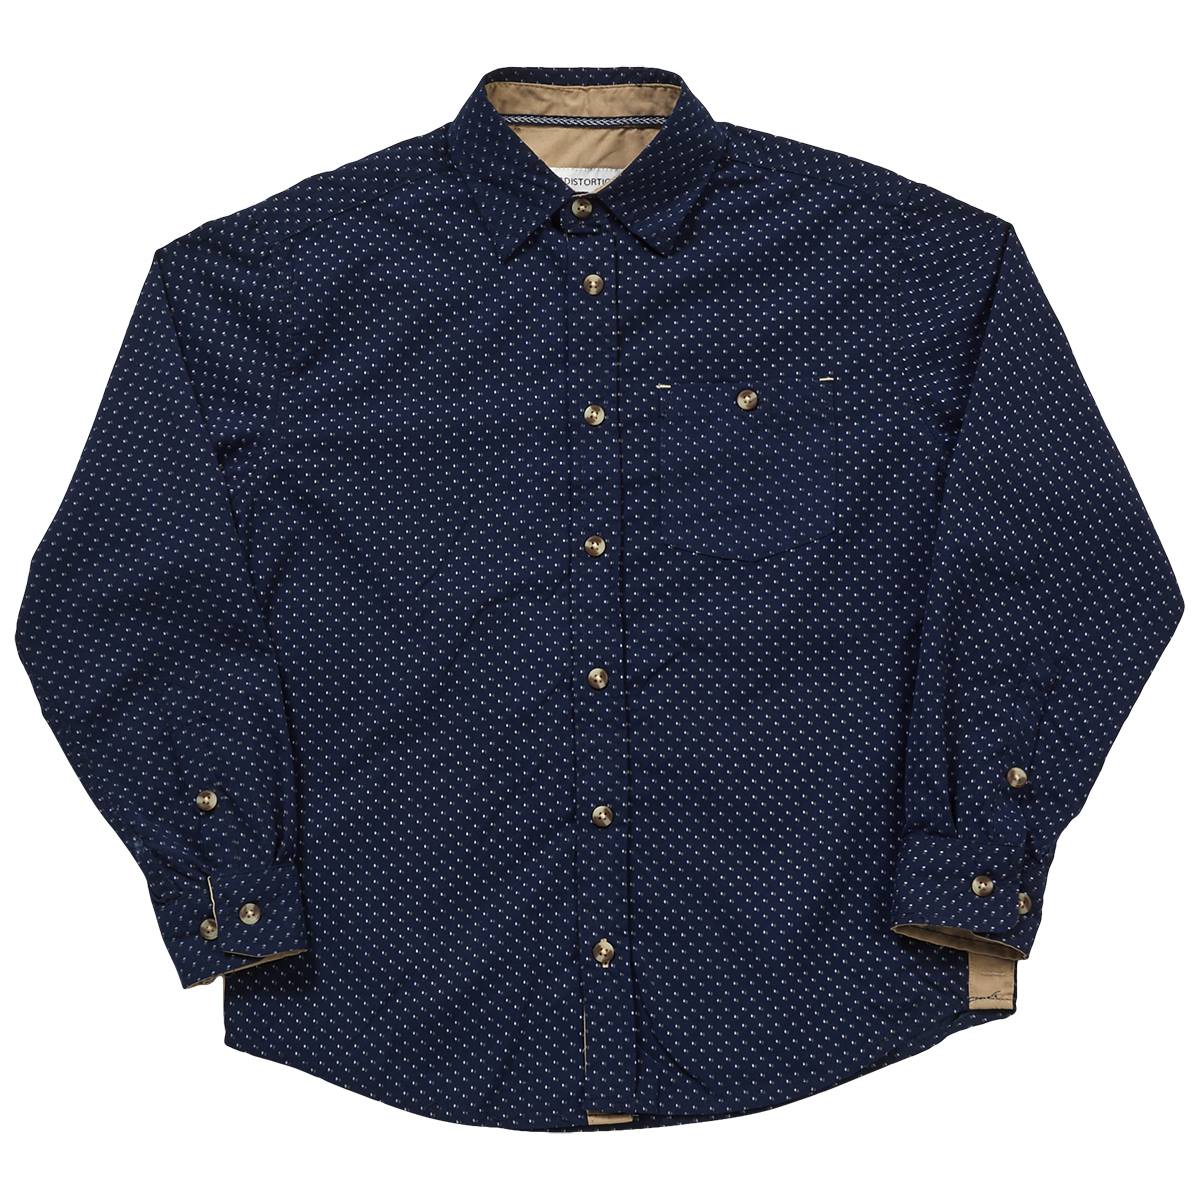 Boys (8-16) Distortion Long Sleeve Button Down Top